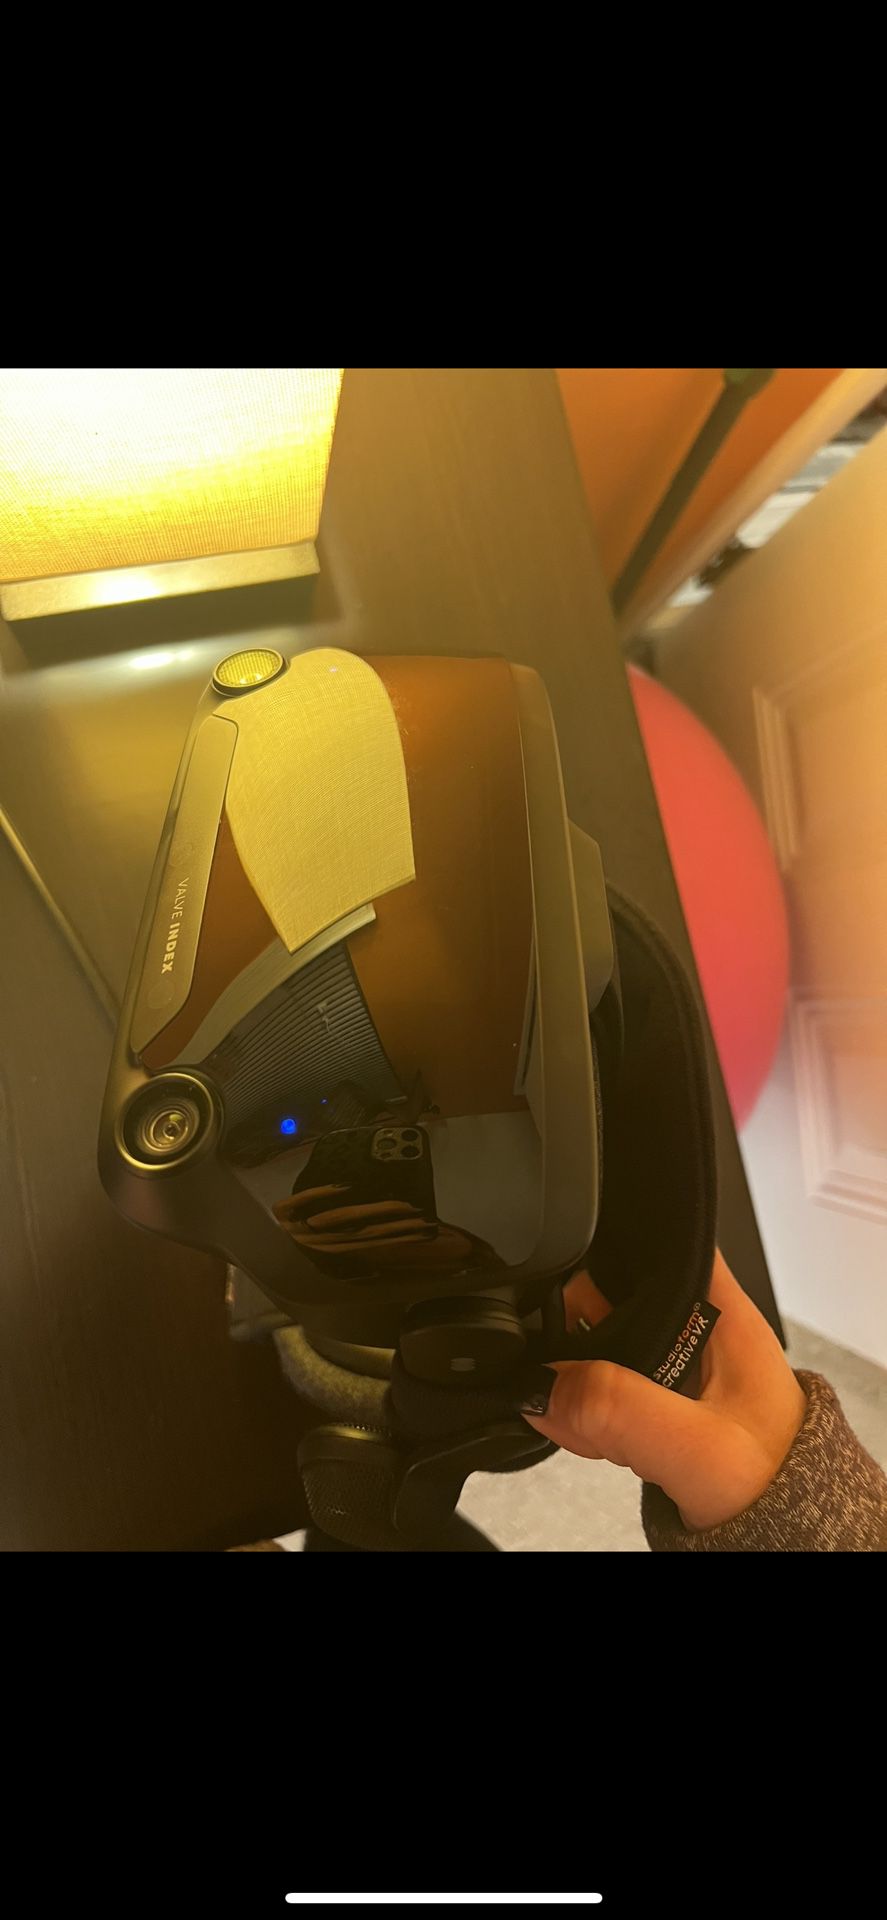 Valve index Headset Only- Used For 2 Weeks